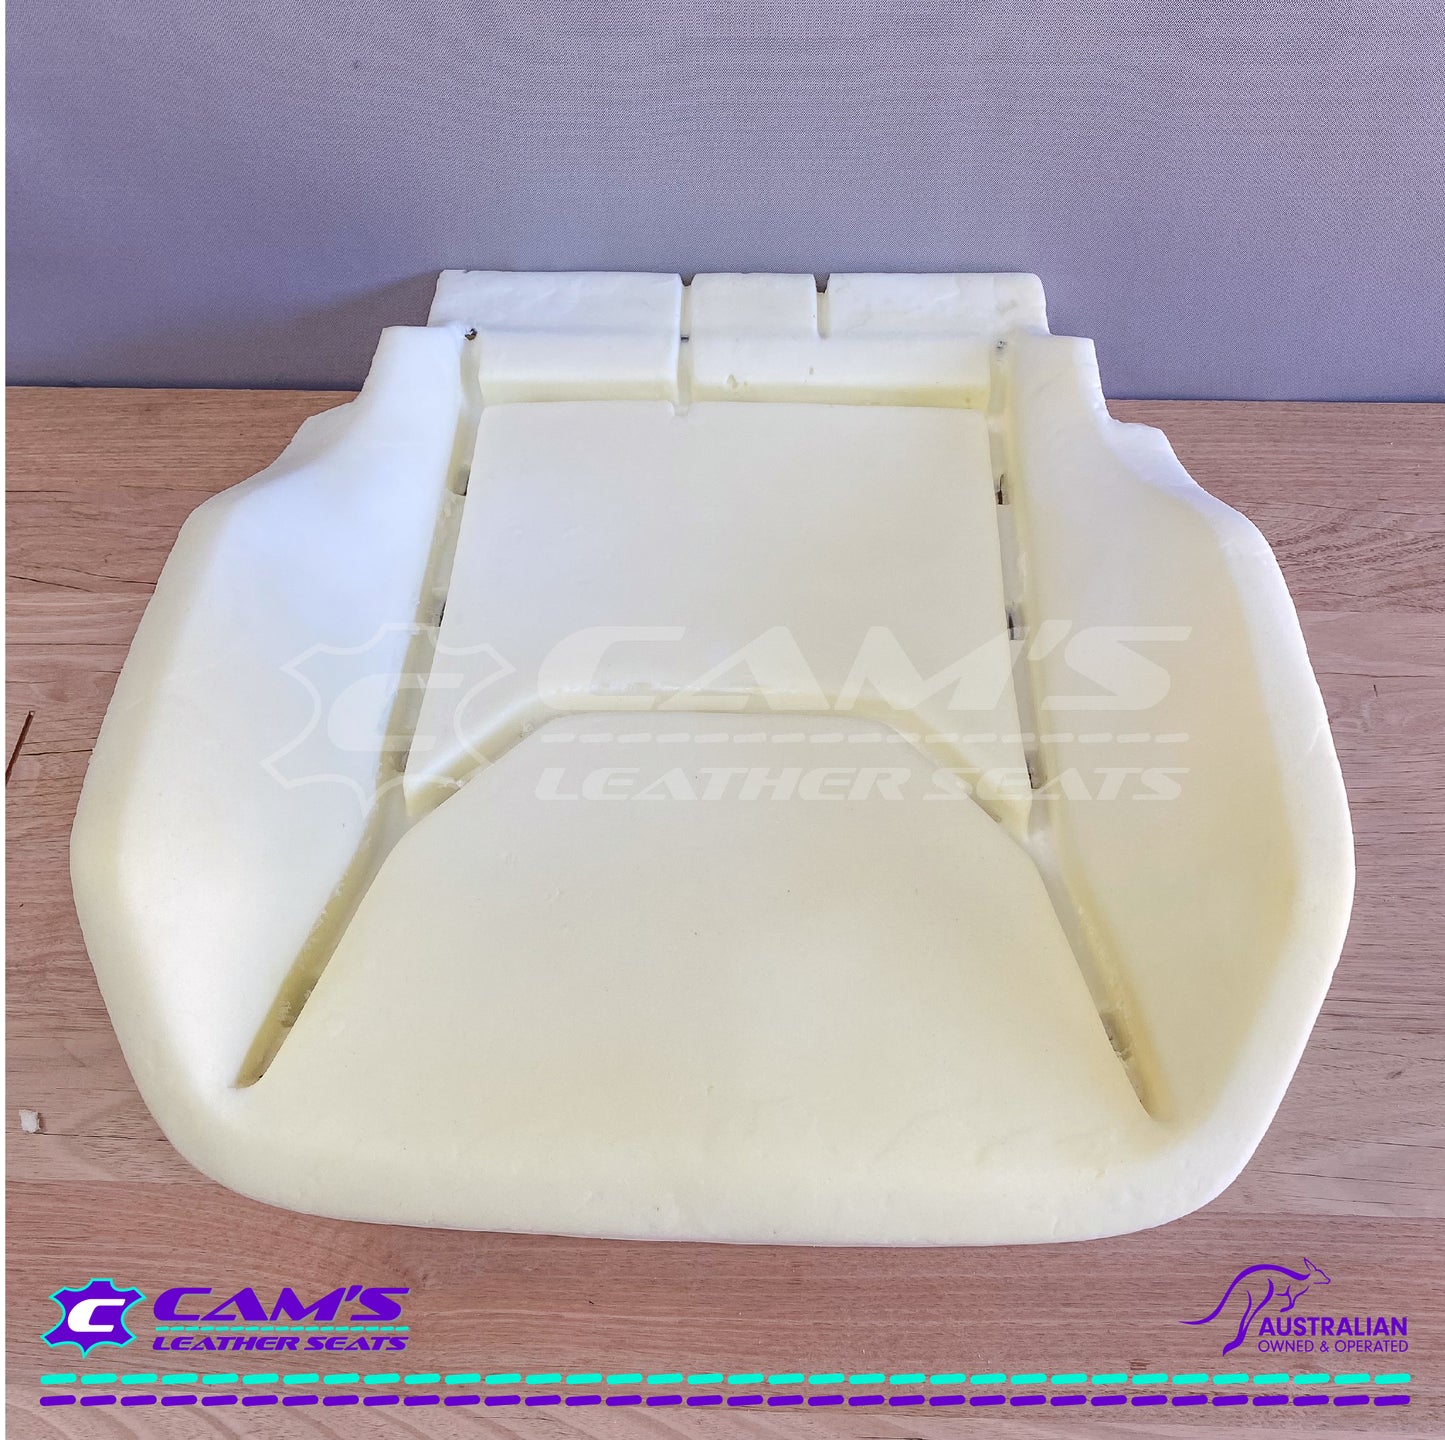 Foams Set for Holden HSV VF GTS CLUBSPORT style - 1 front seat foam upgrade - For pair buy 2